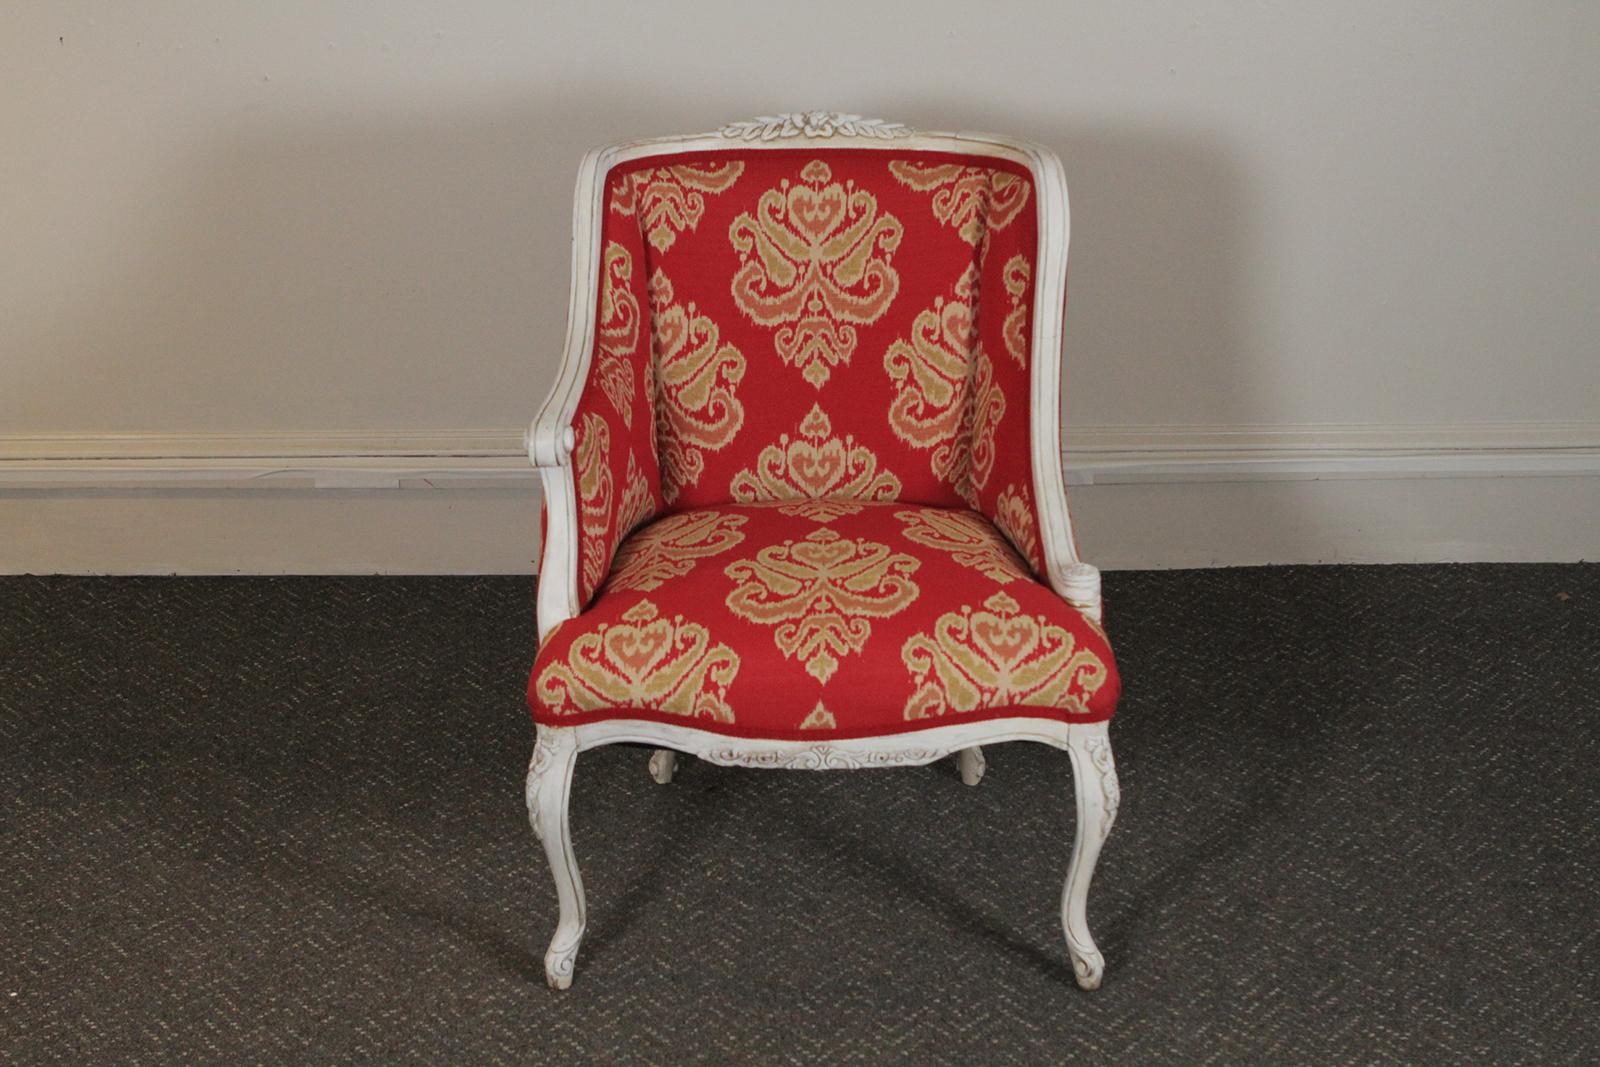 Pair of European asymmetrical style accent chairs with new red and white Ikat fabric and whitewashed wood frames
 Dimensions: 24” W x 25” D x 31.5